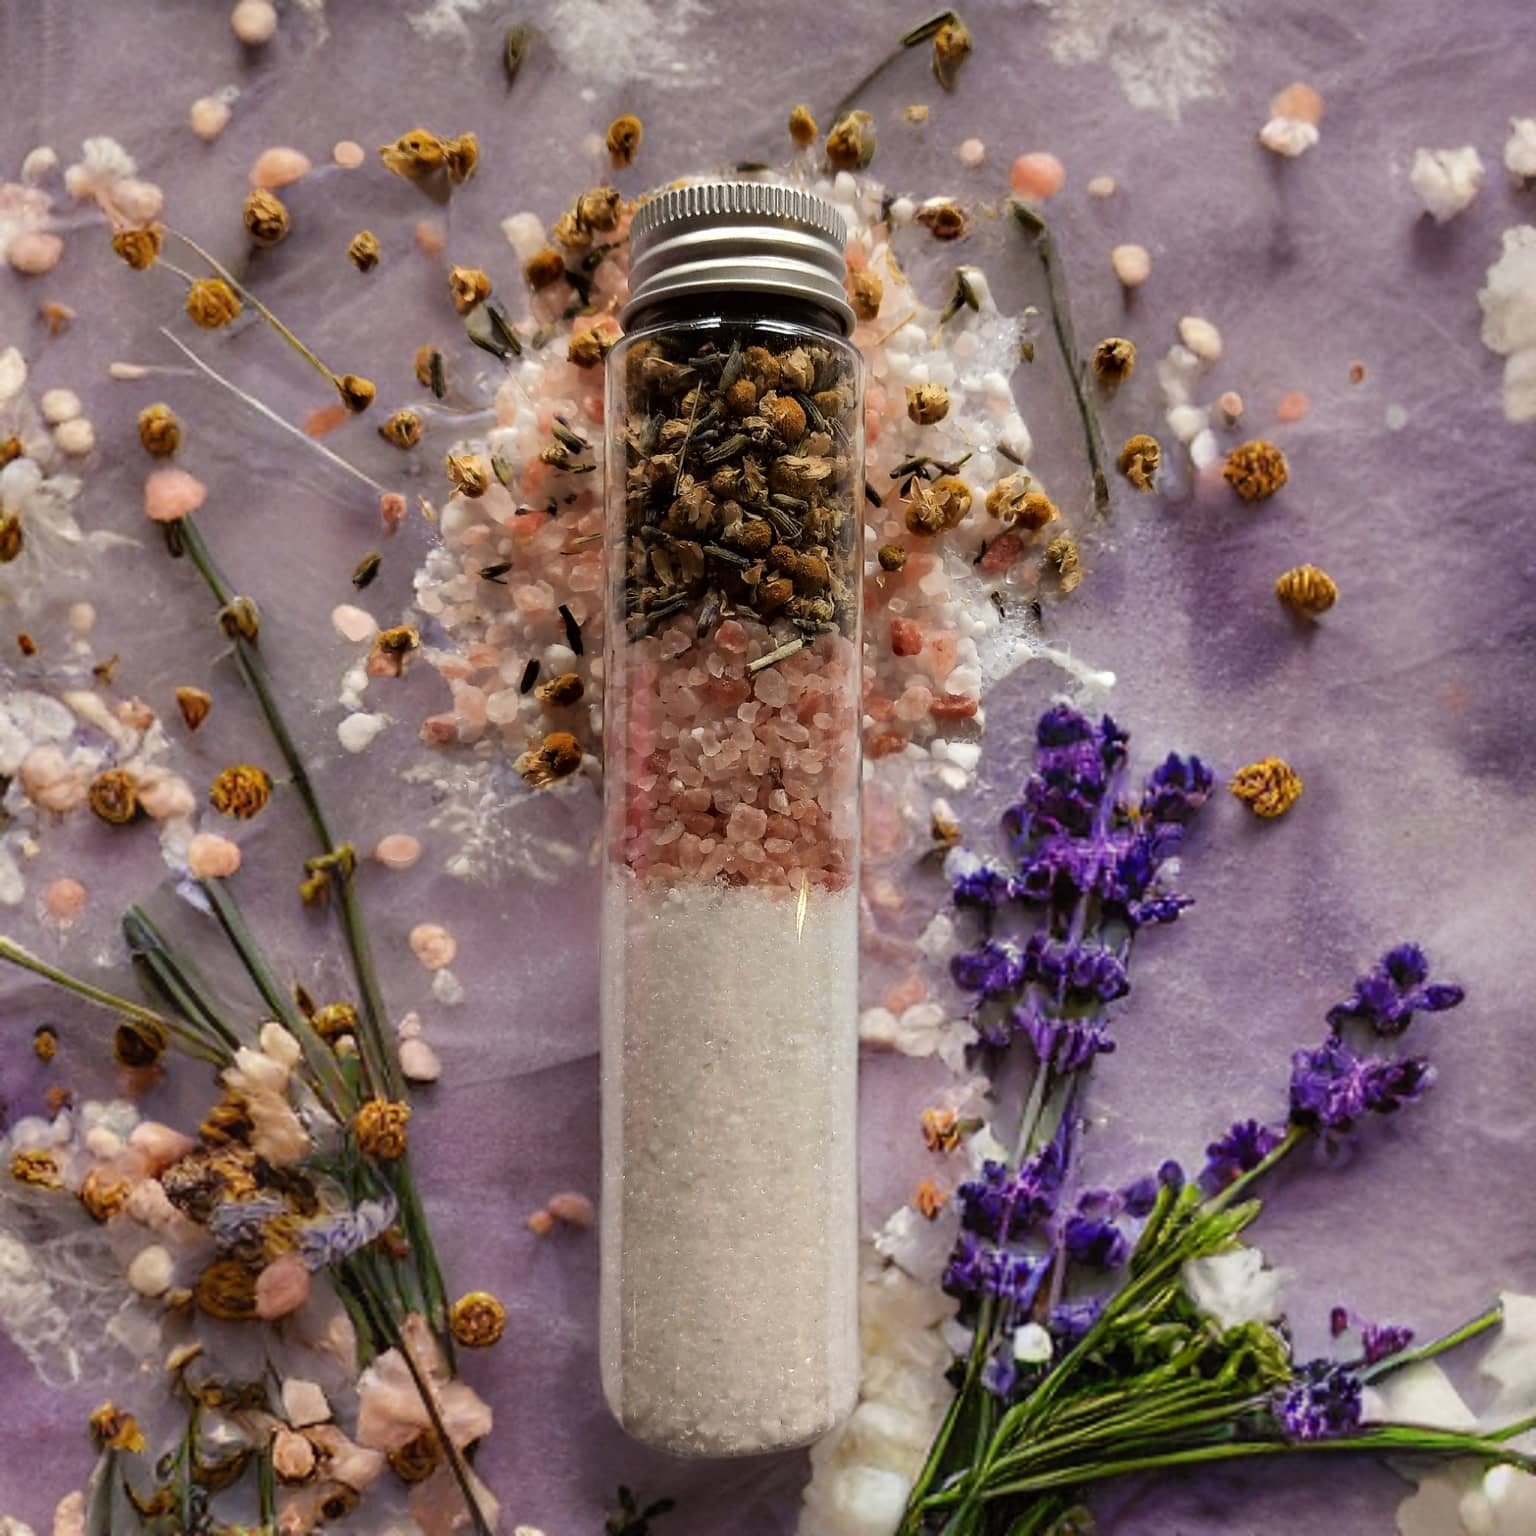 Indulge in our Elizabethan Chamomile Lavender Botanical Bath Salt Tube for the ultimate relaxation bath experience.